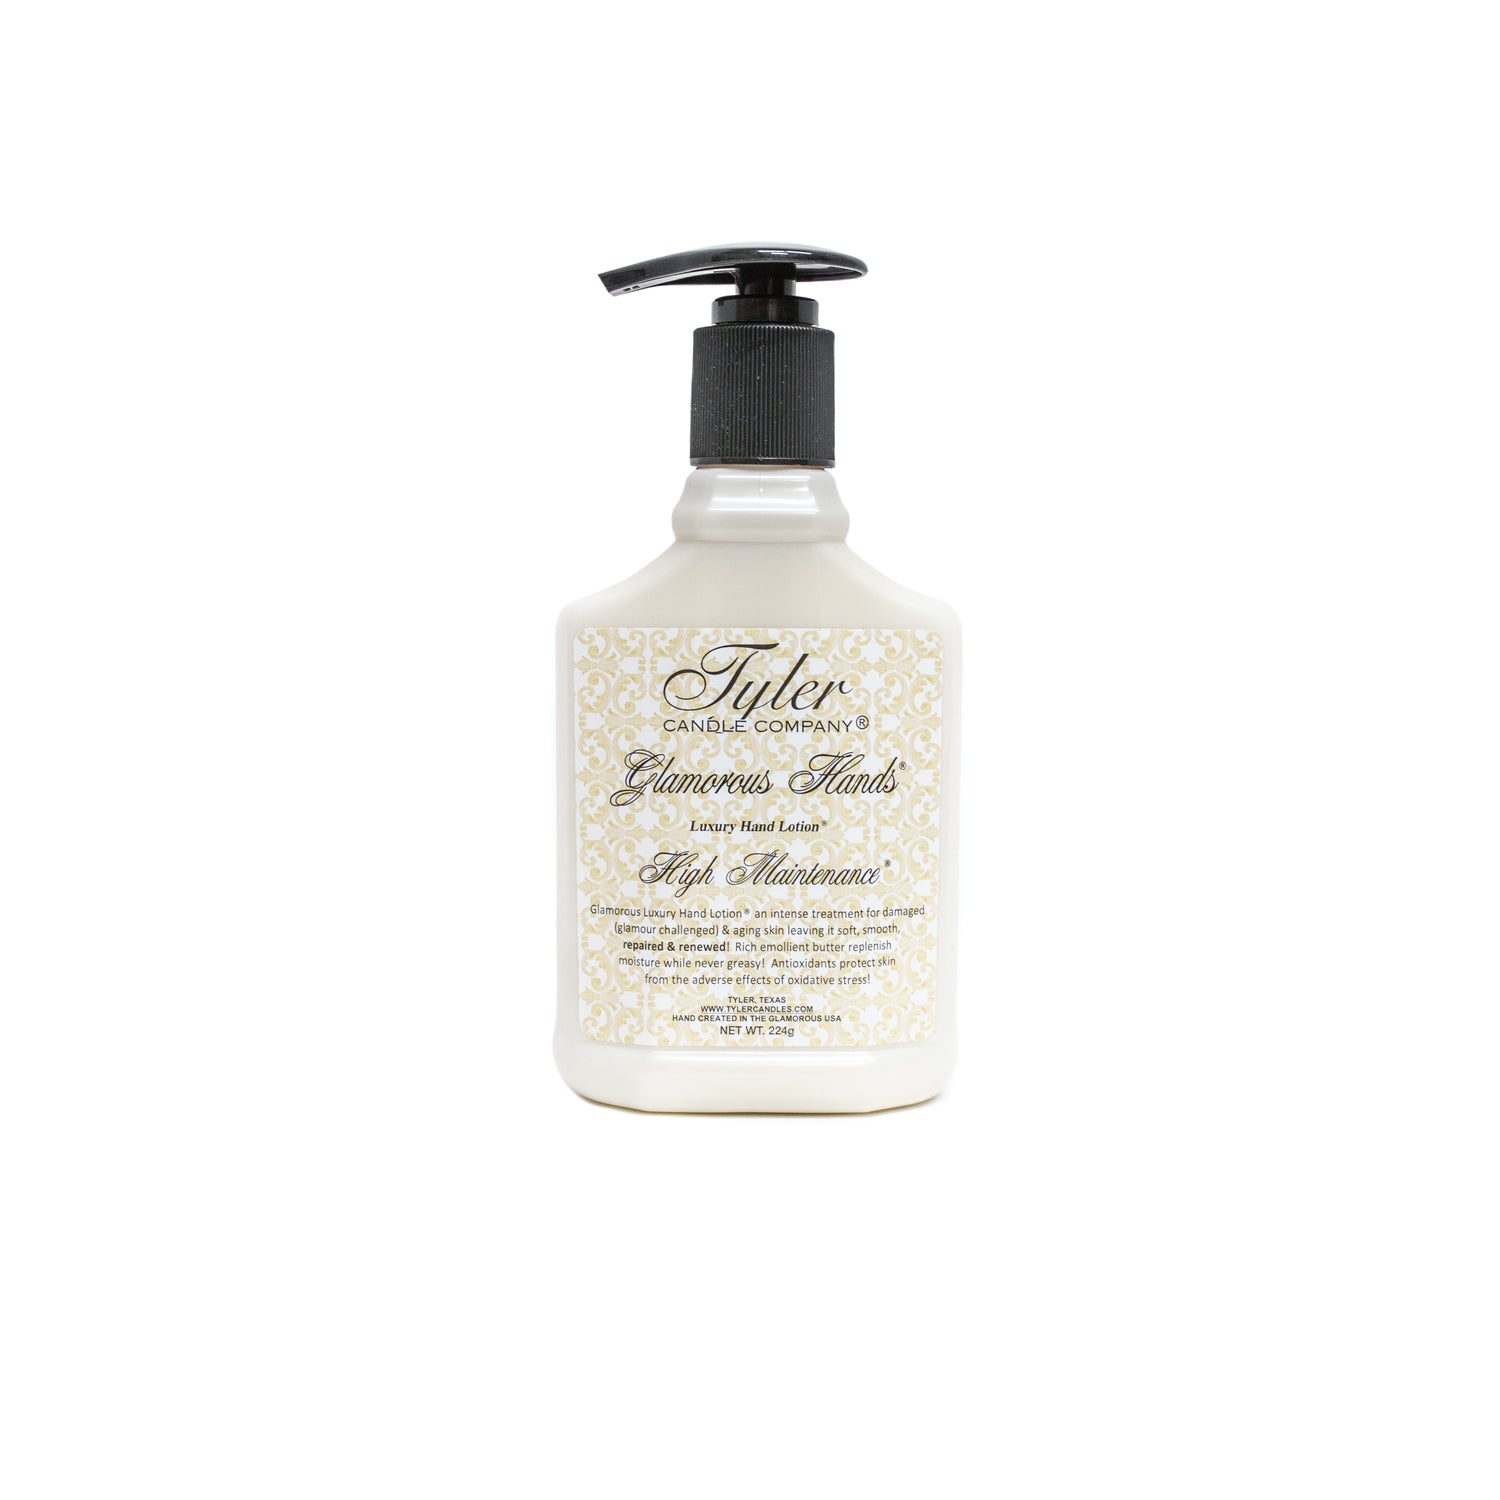 Tyler Candles - Glamorous Luxury Hand Lotion Bath & Body in HIGH MAINTENANCE at Wrapsody